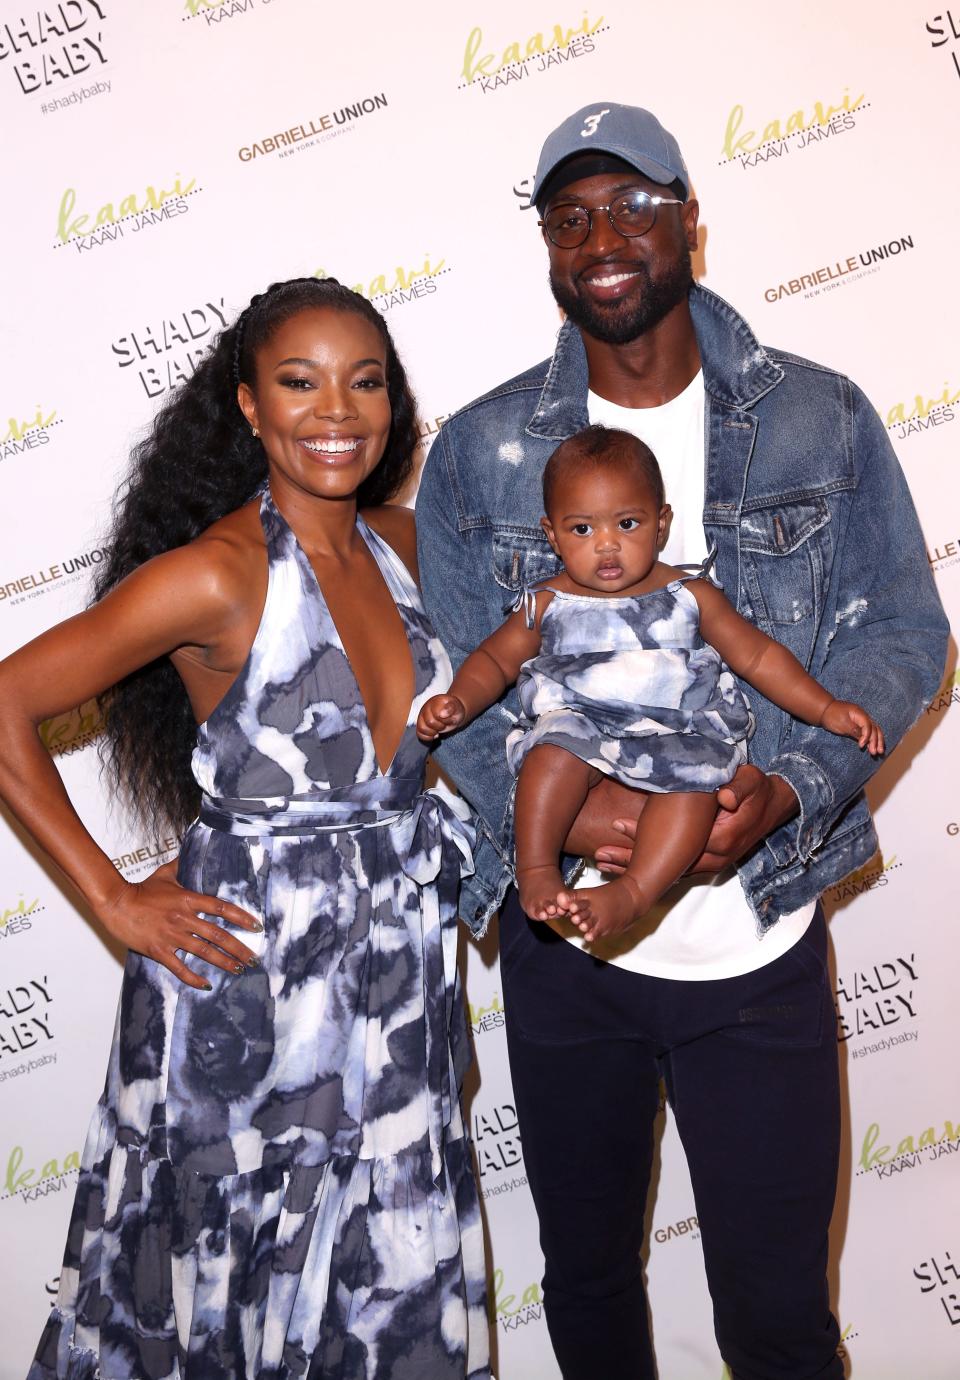 Shady Baby Gabrielle Union And Dwyane Wade Pen Children S Book Inspired By 2 Year Old Daughter